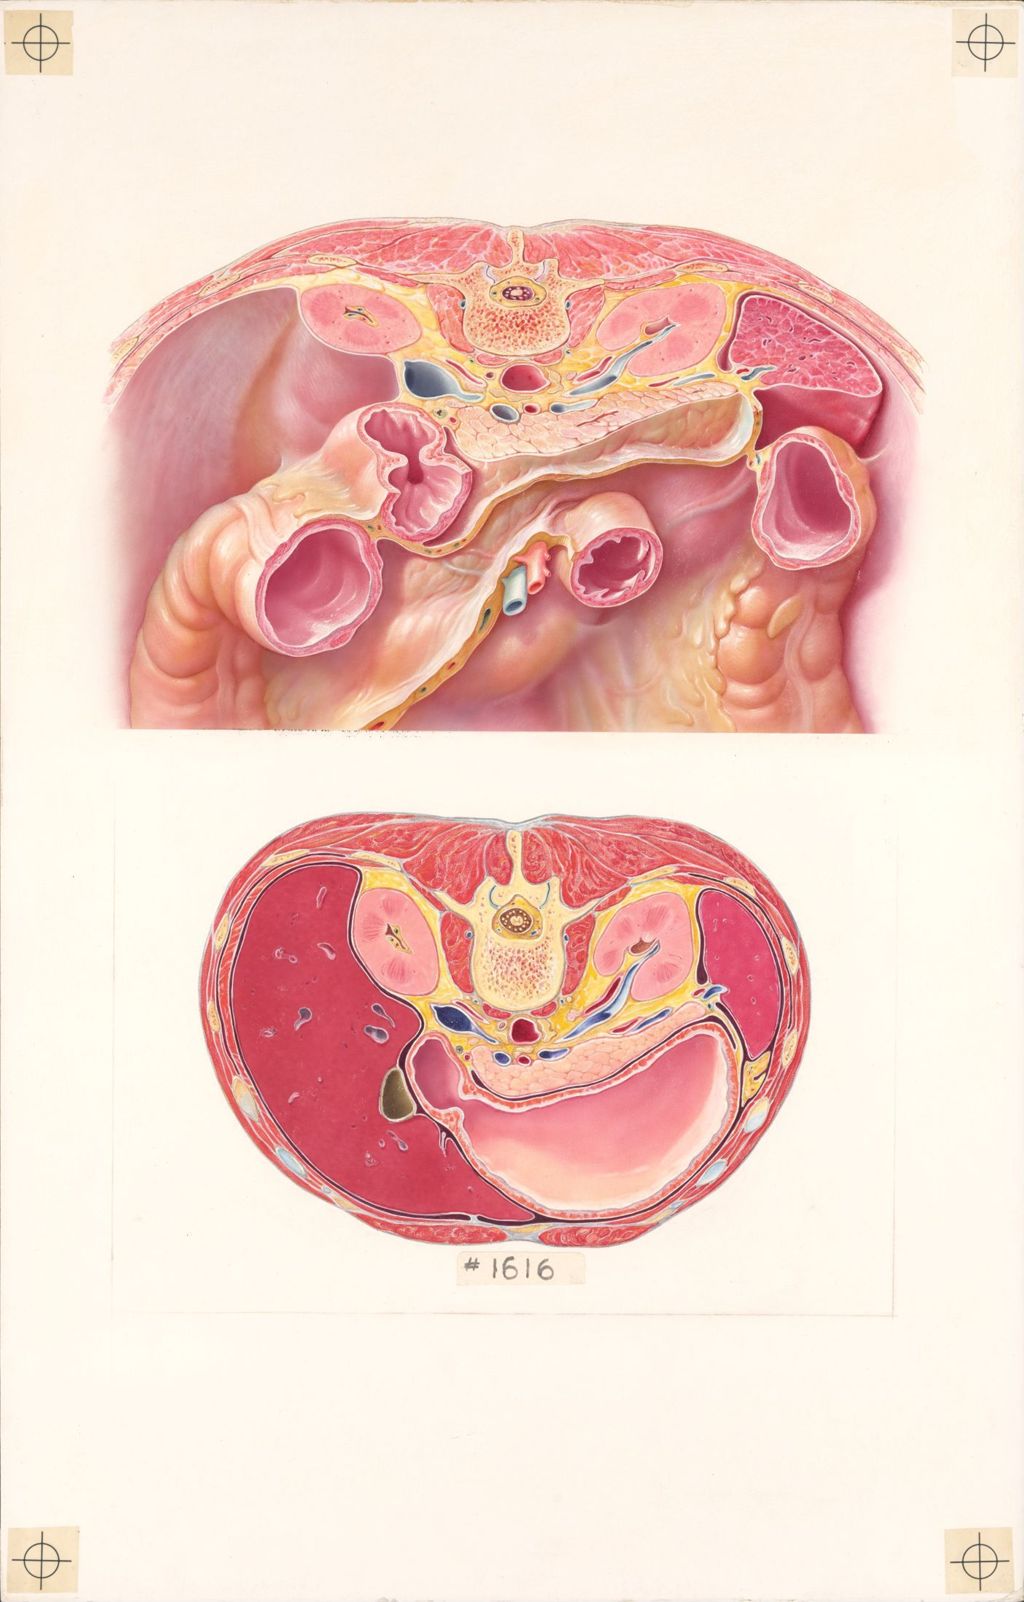 Medical Profiles, The Anatomical Relationships of the Pancreas